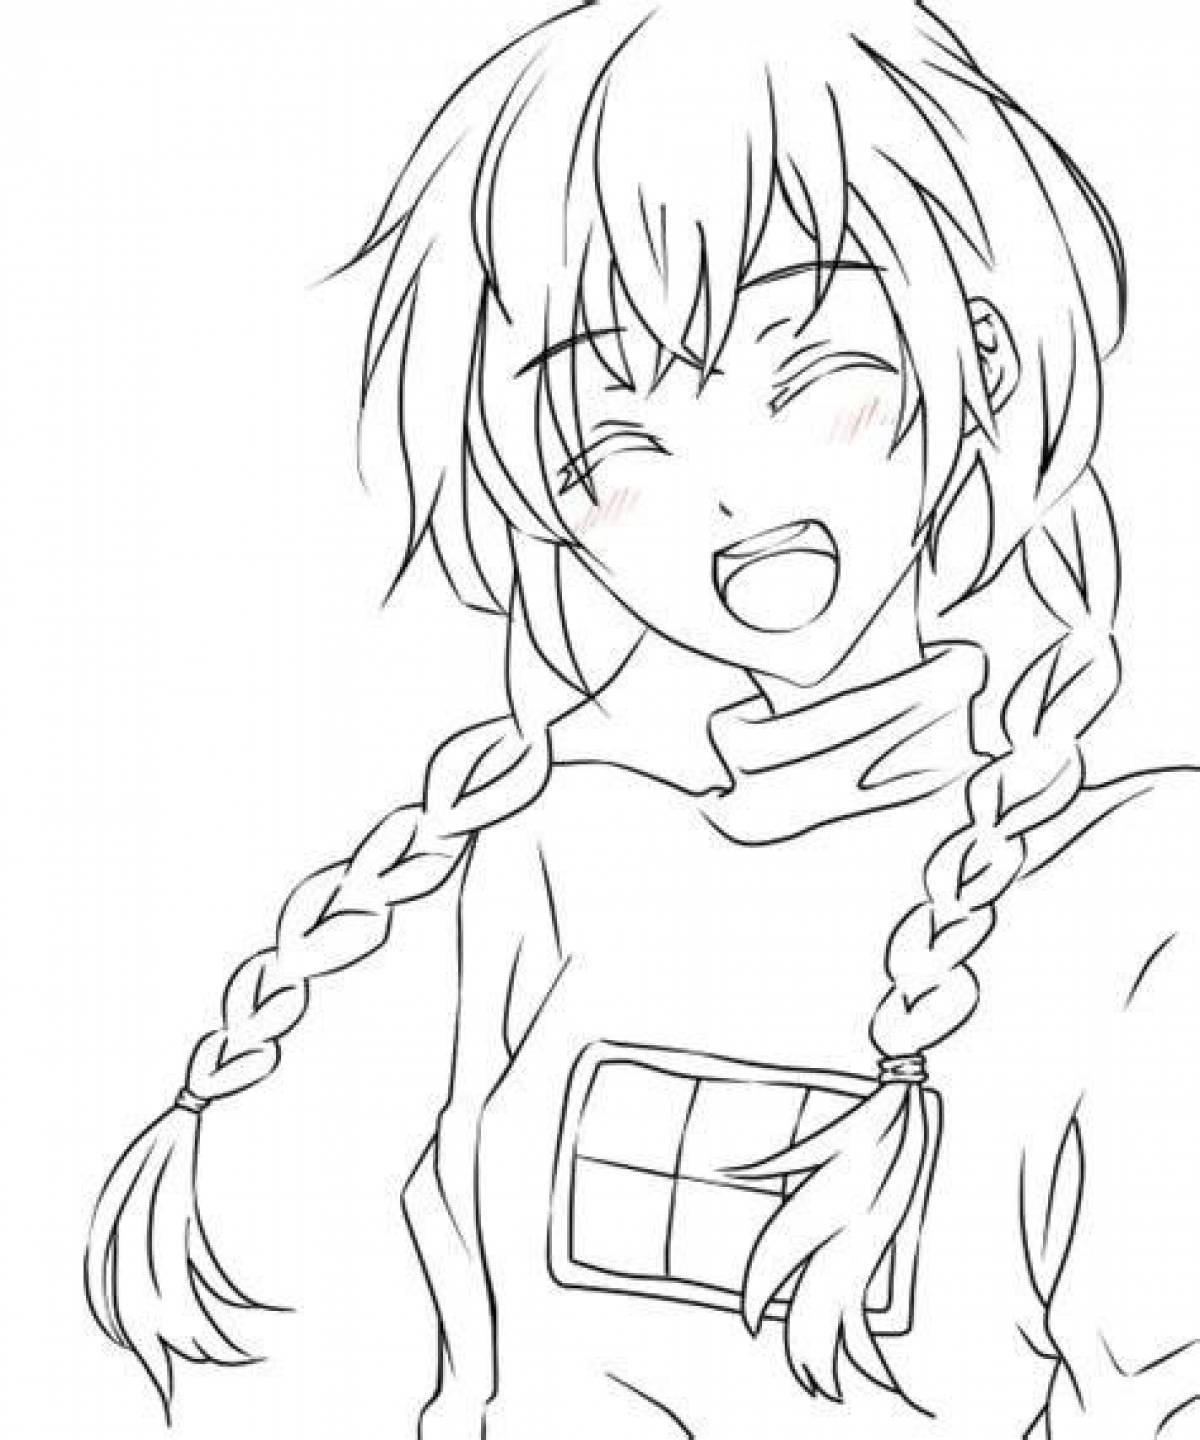 Delightful anime chan coloring page